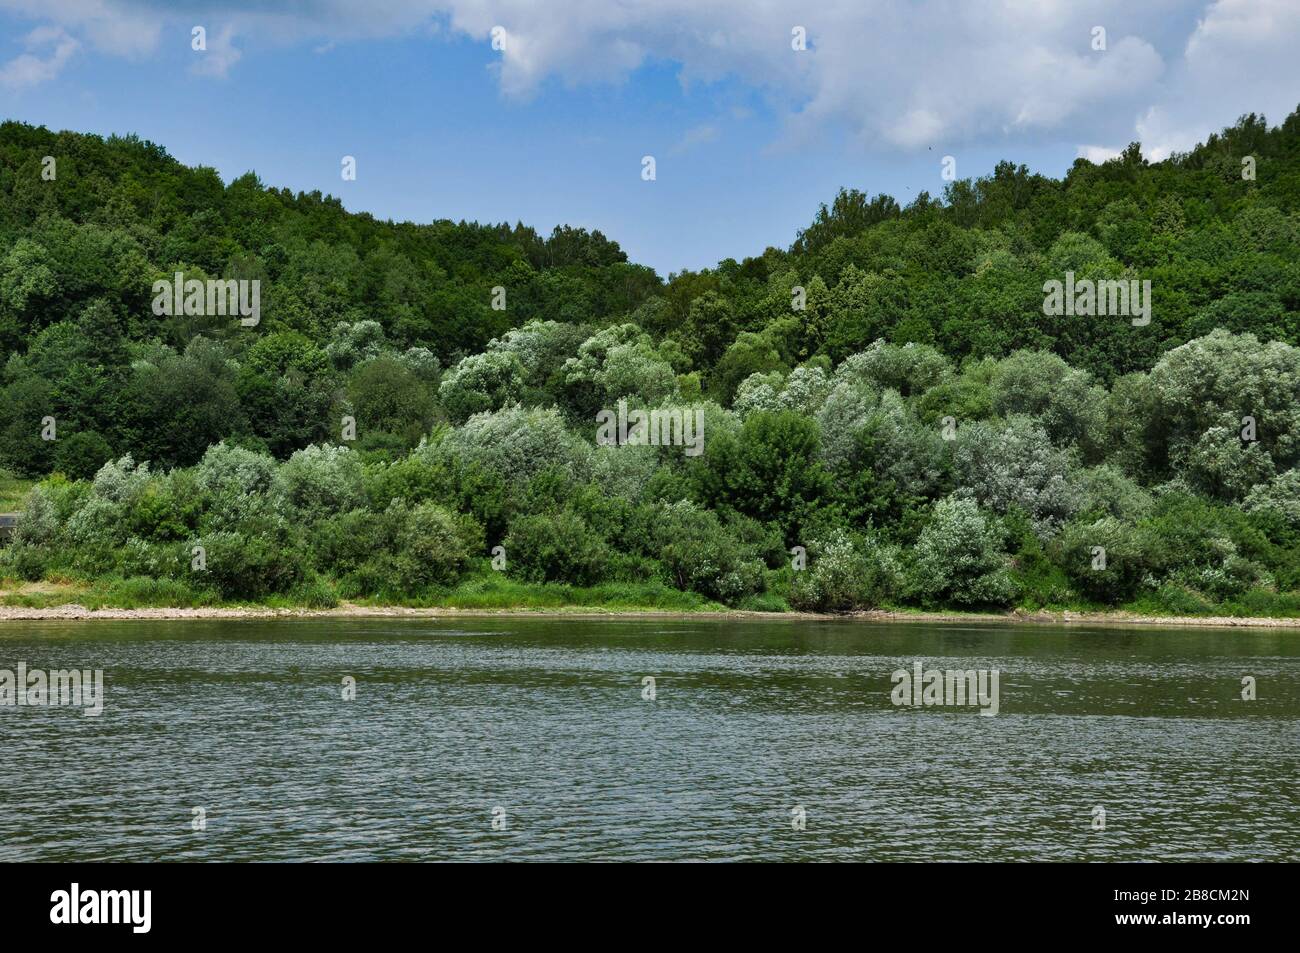 Riverscape on a windy summer day with river, forest growing on a river bank and cloudy sky. Stock Photo